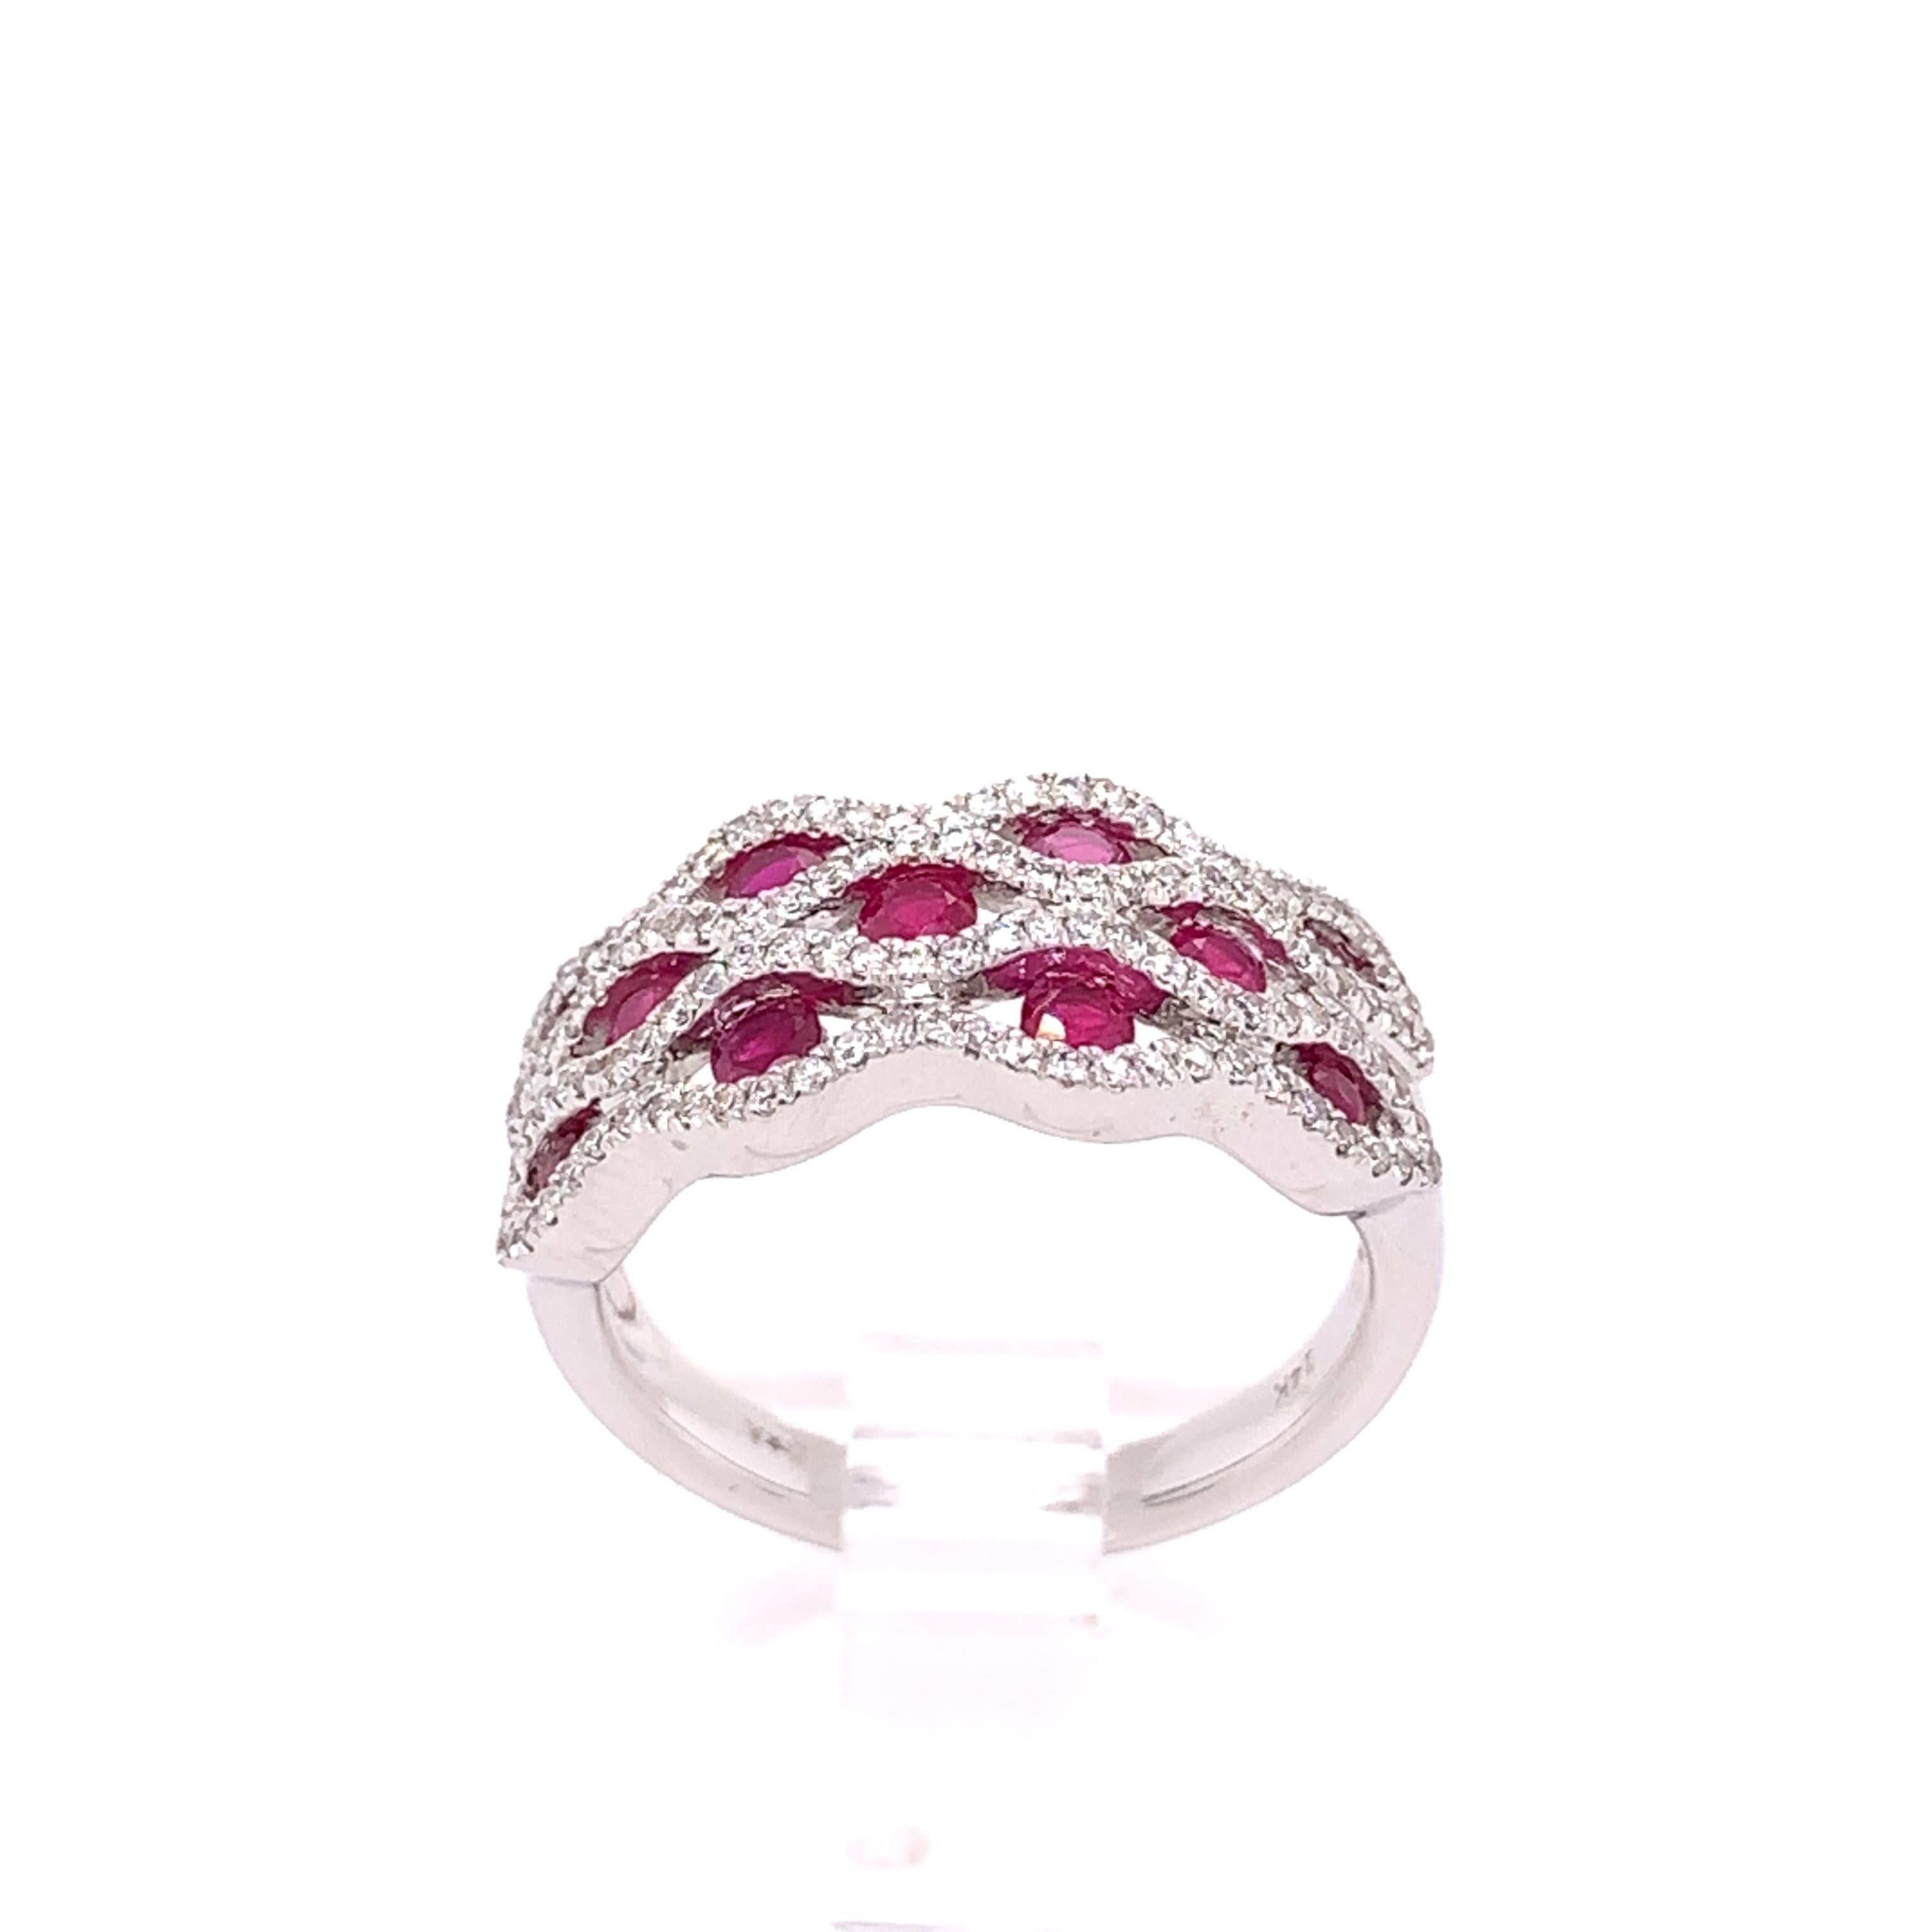 A stunning cocktail ring crafted in luxurious 14 karat white gold with 11 round natural ruby stones weighing approximately 0.66 carats. 

This ring also contains 118 natural round brilliant diamonds weighing approximately 0.35 carats, H-I color, and